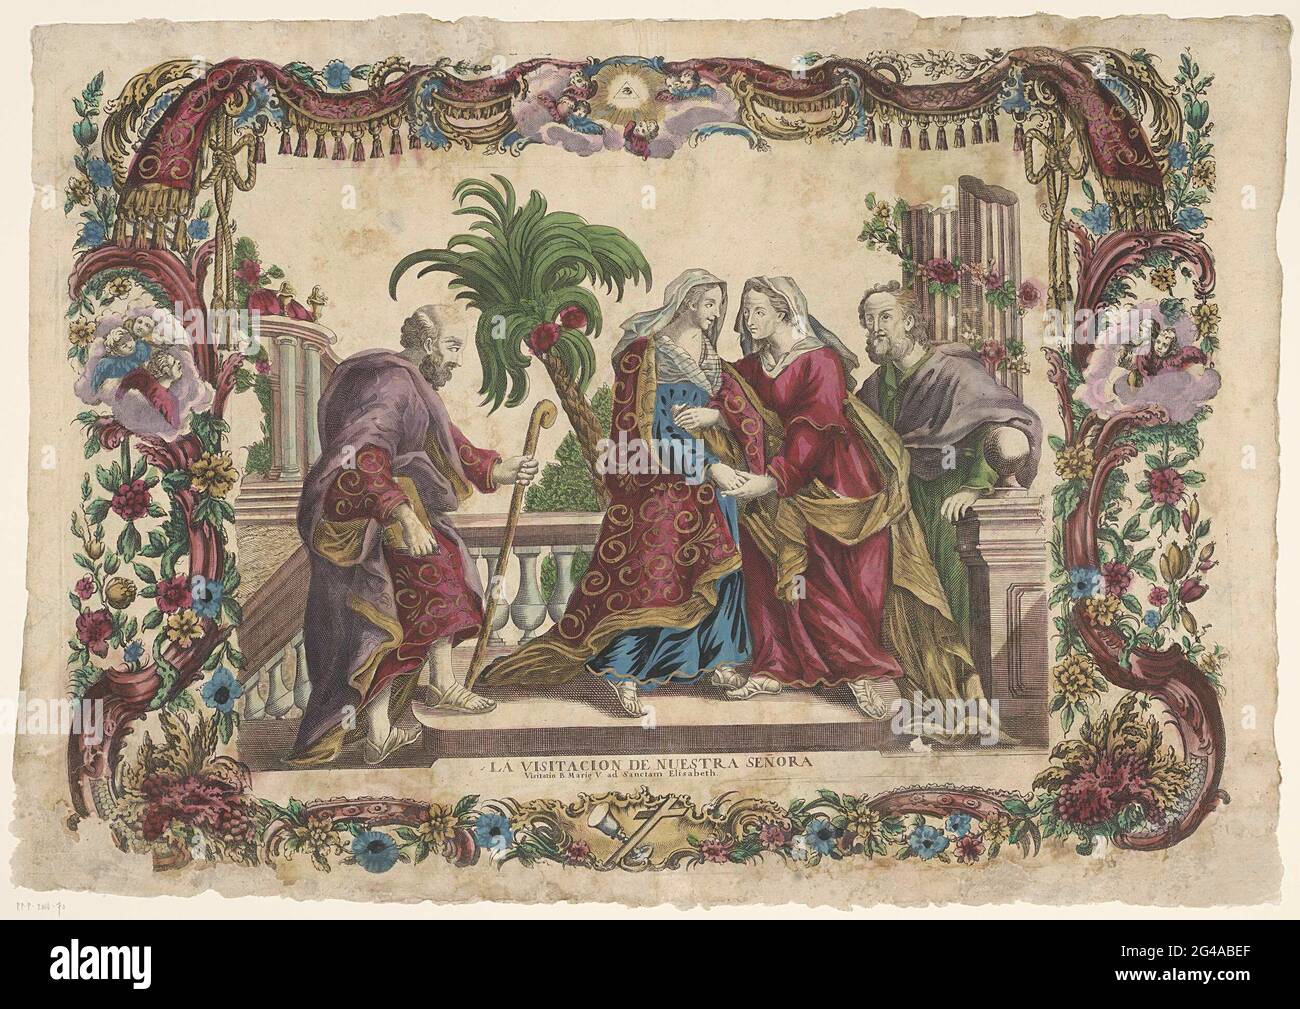 Visitation; La Visitacion de Nuestra Señora / Visitation B. Marie V. Ad Sanctam Elisabeth. The pregnant Maria visits her niece Elisabet. Zacharias and Joseph are next to it. Title in two languages under the show. The scene is caught in an ornament edge with flowers and cherubs. Stock Photo